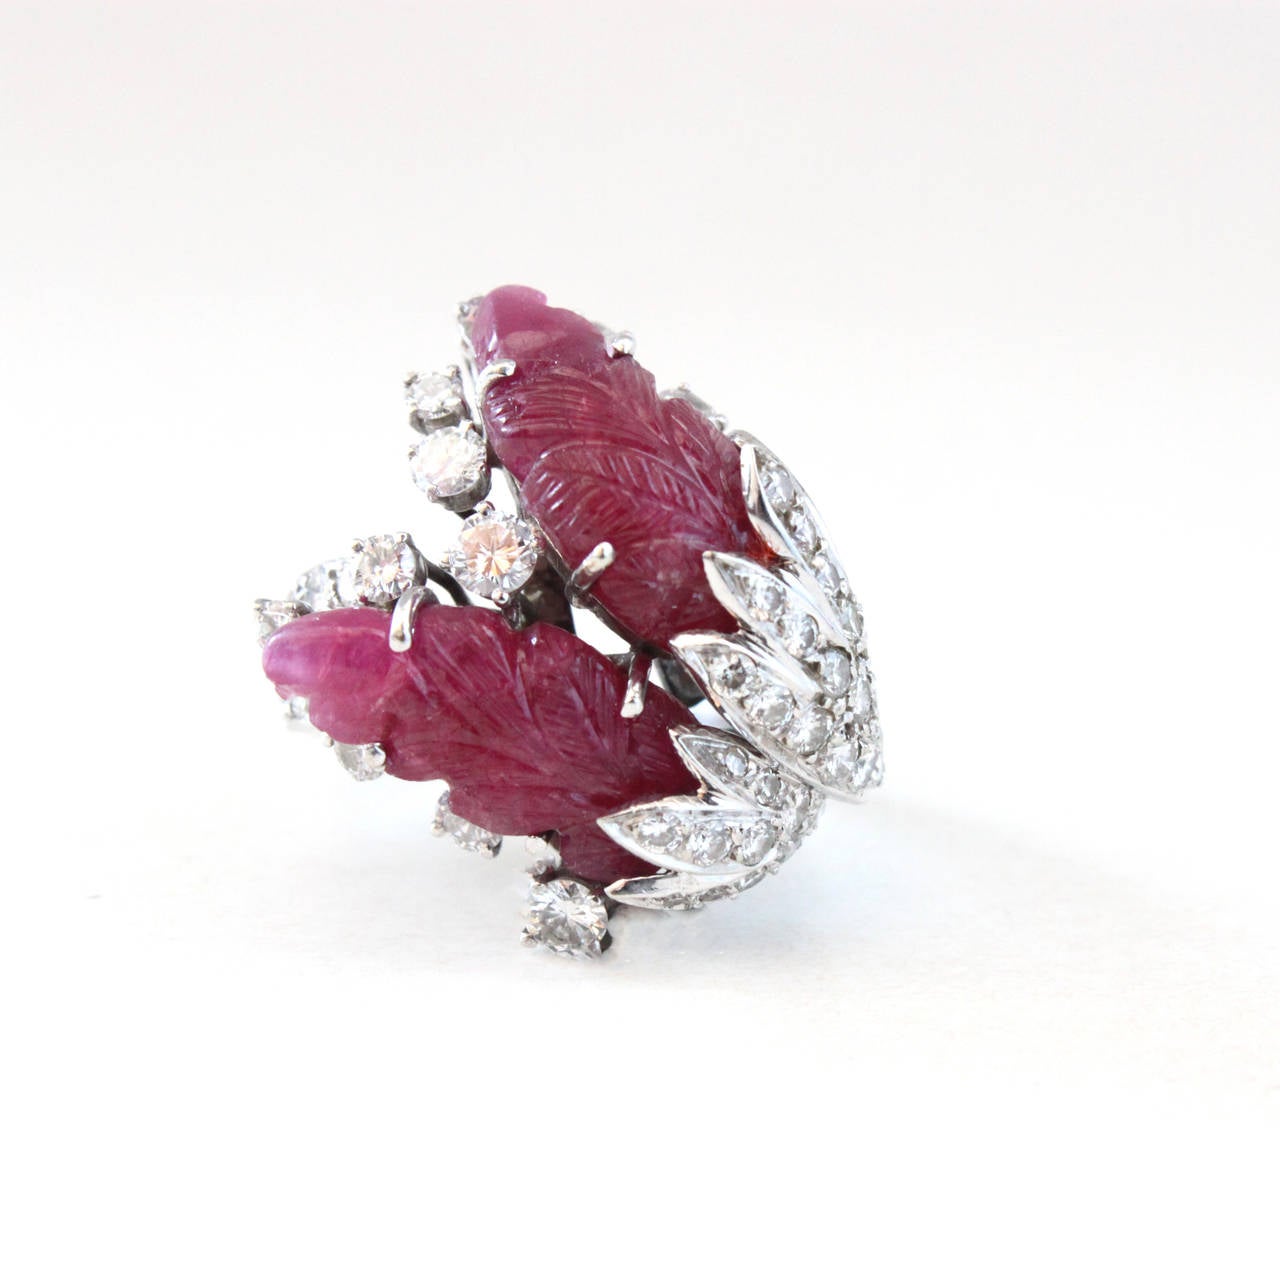 A carved rubies and diamond white gold ring, beautifully designed in the form of swan feathers. The carved rubies are of Burmese origin and form the end of two feathers. They are surrounded by ca. 2-3 carats of round brilliant diamonds (quality